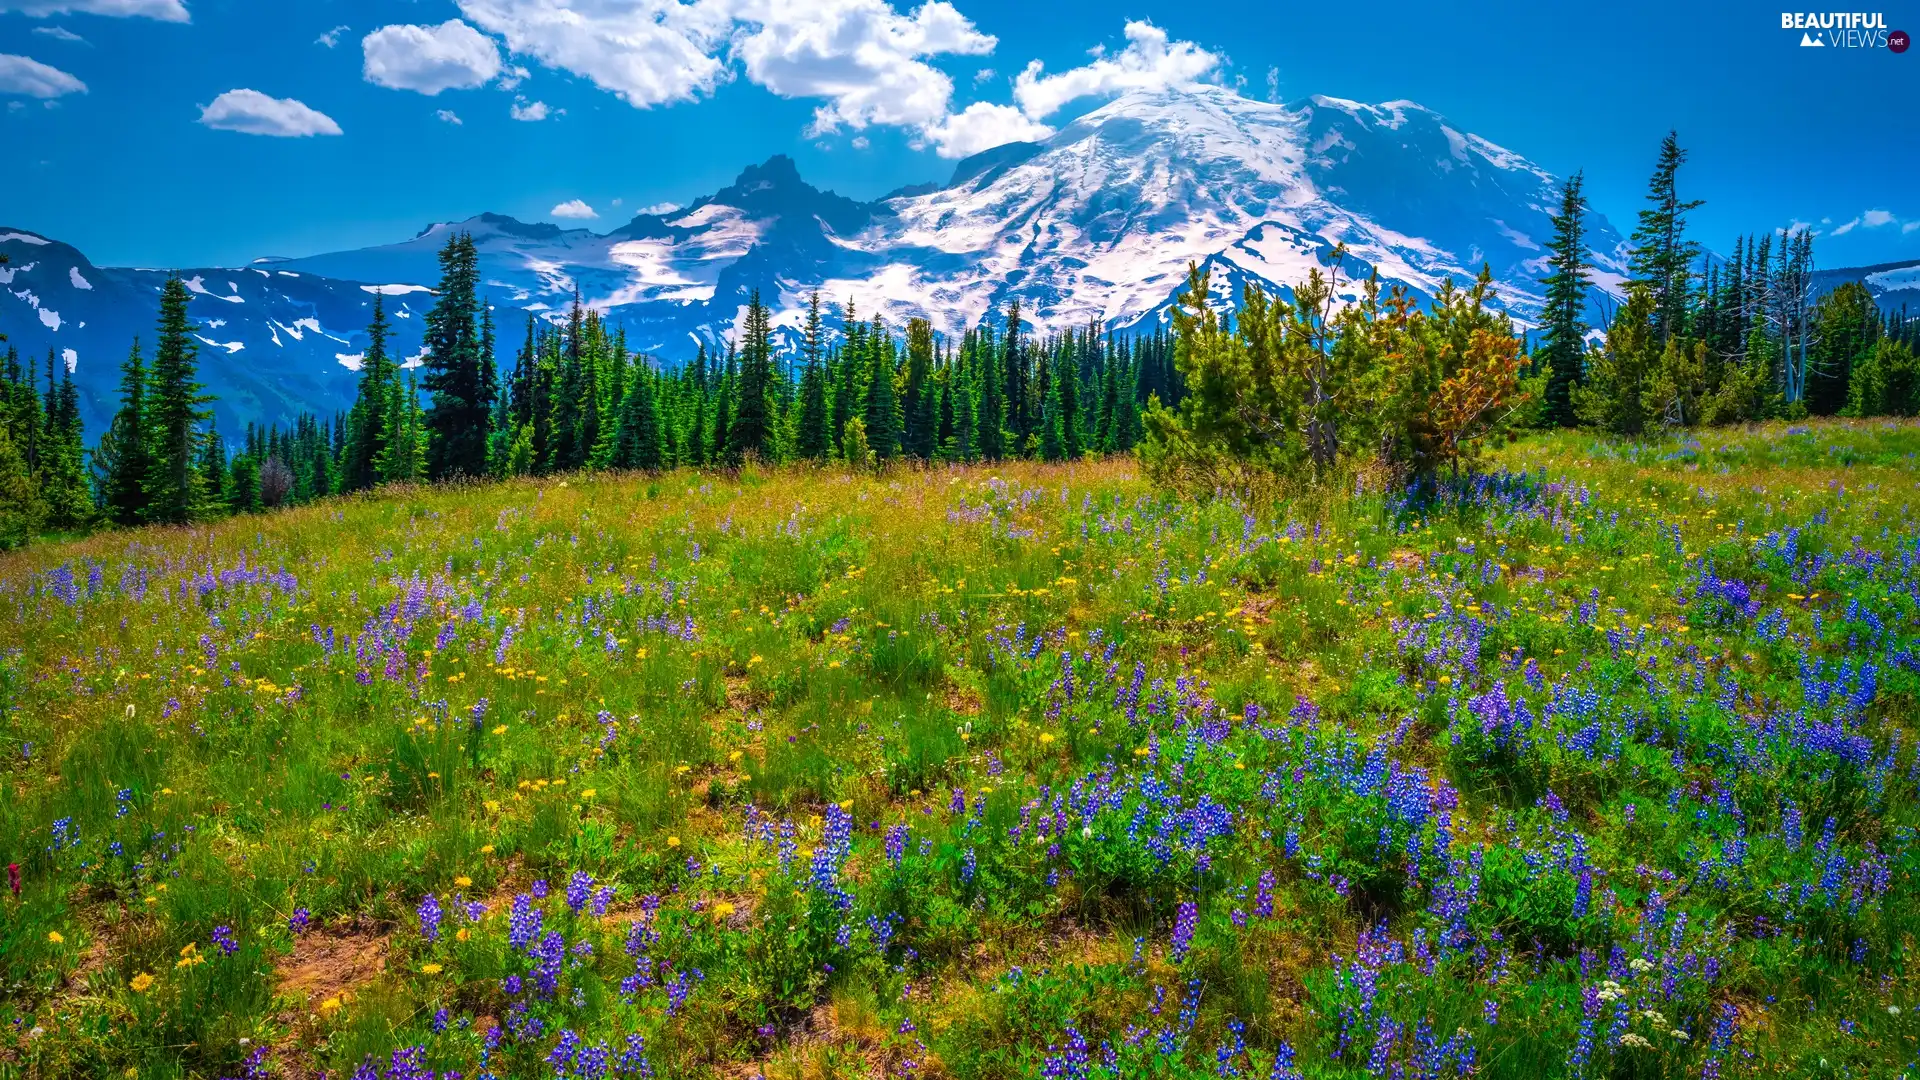 Flowers, trees, Mount Rainier National Park, Washington State, Meadow, Mountains, viewes, The United States, lupine, purple